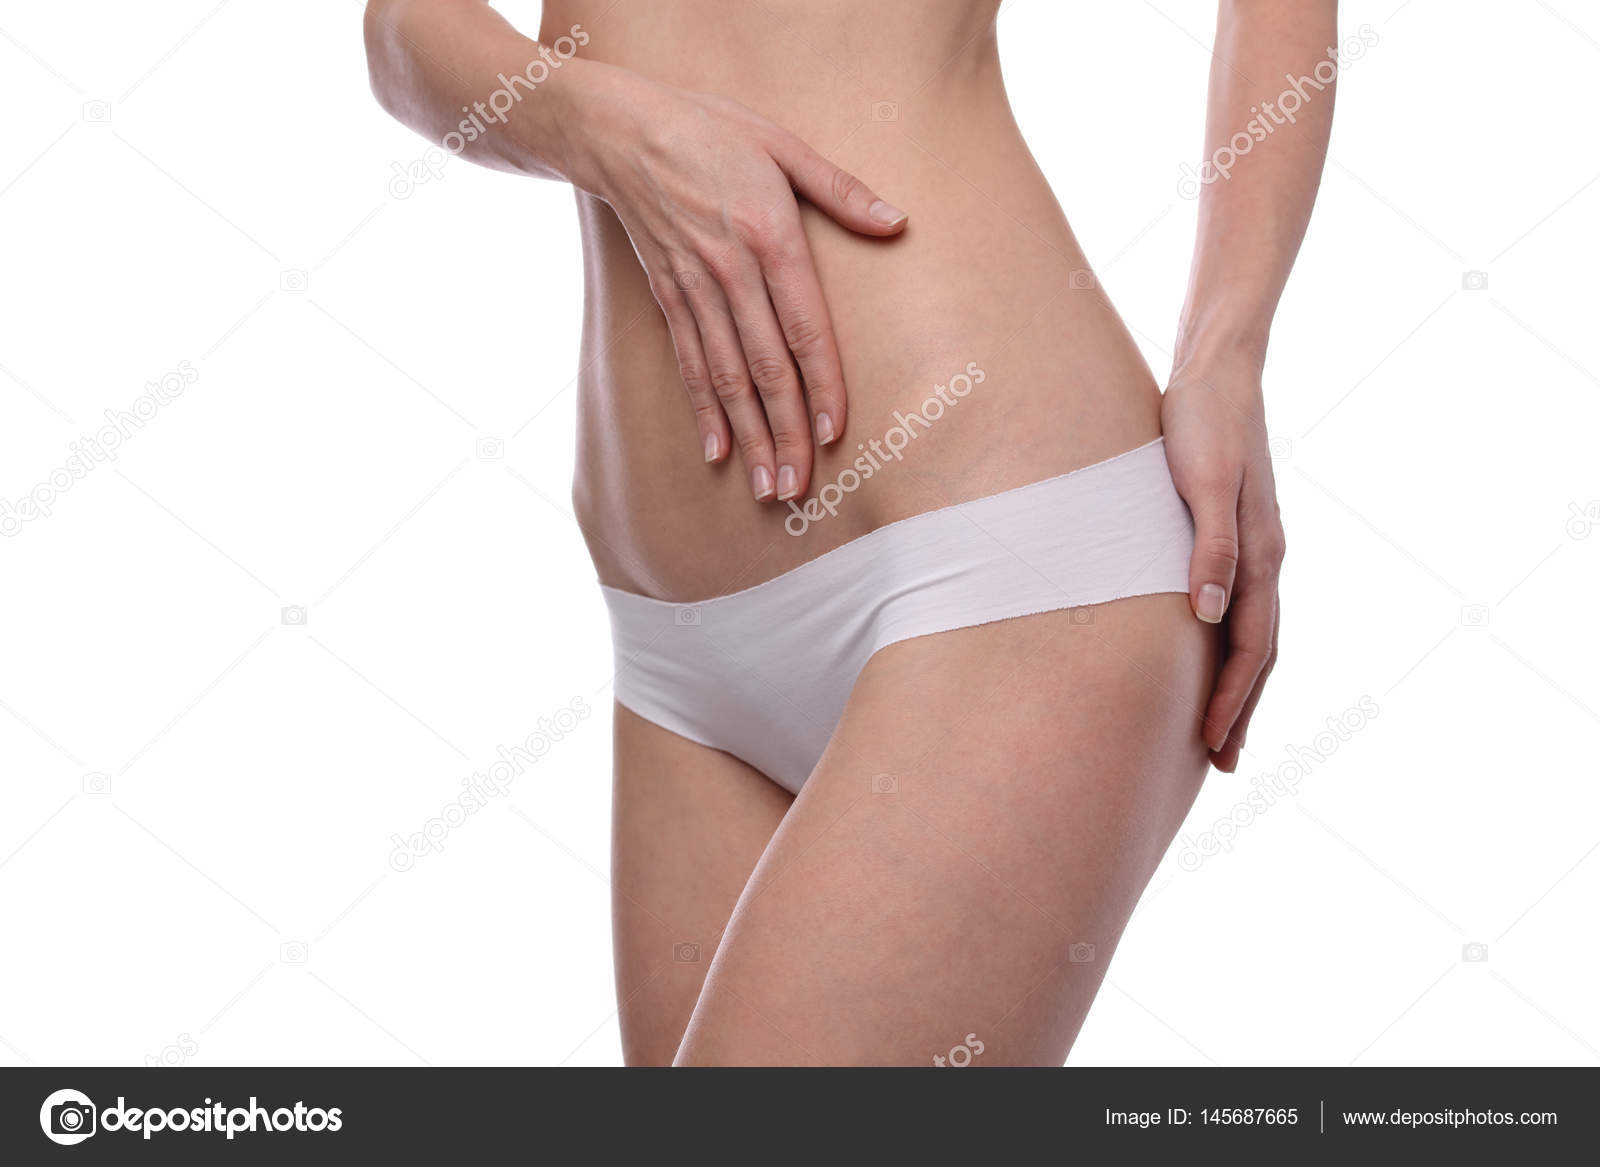 Slim body shape. Beautiful wearing white underwear isolated. Healthy body, torso, slim waist, belly, abdomen close up. Sport, fitness, results. Stock Photo by 145687665